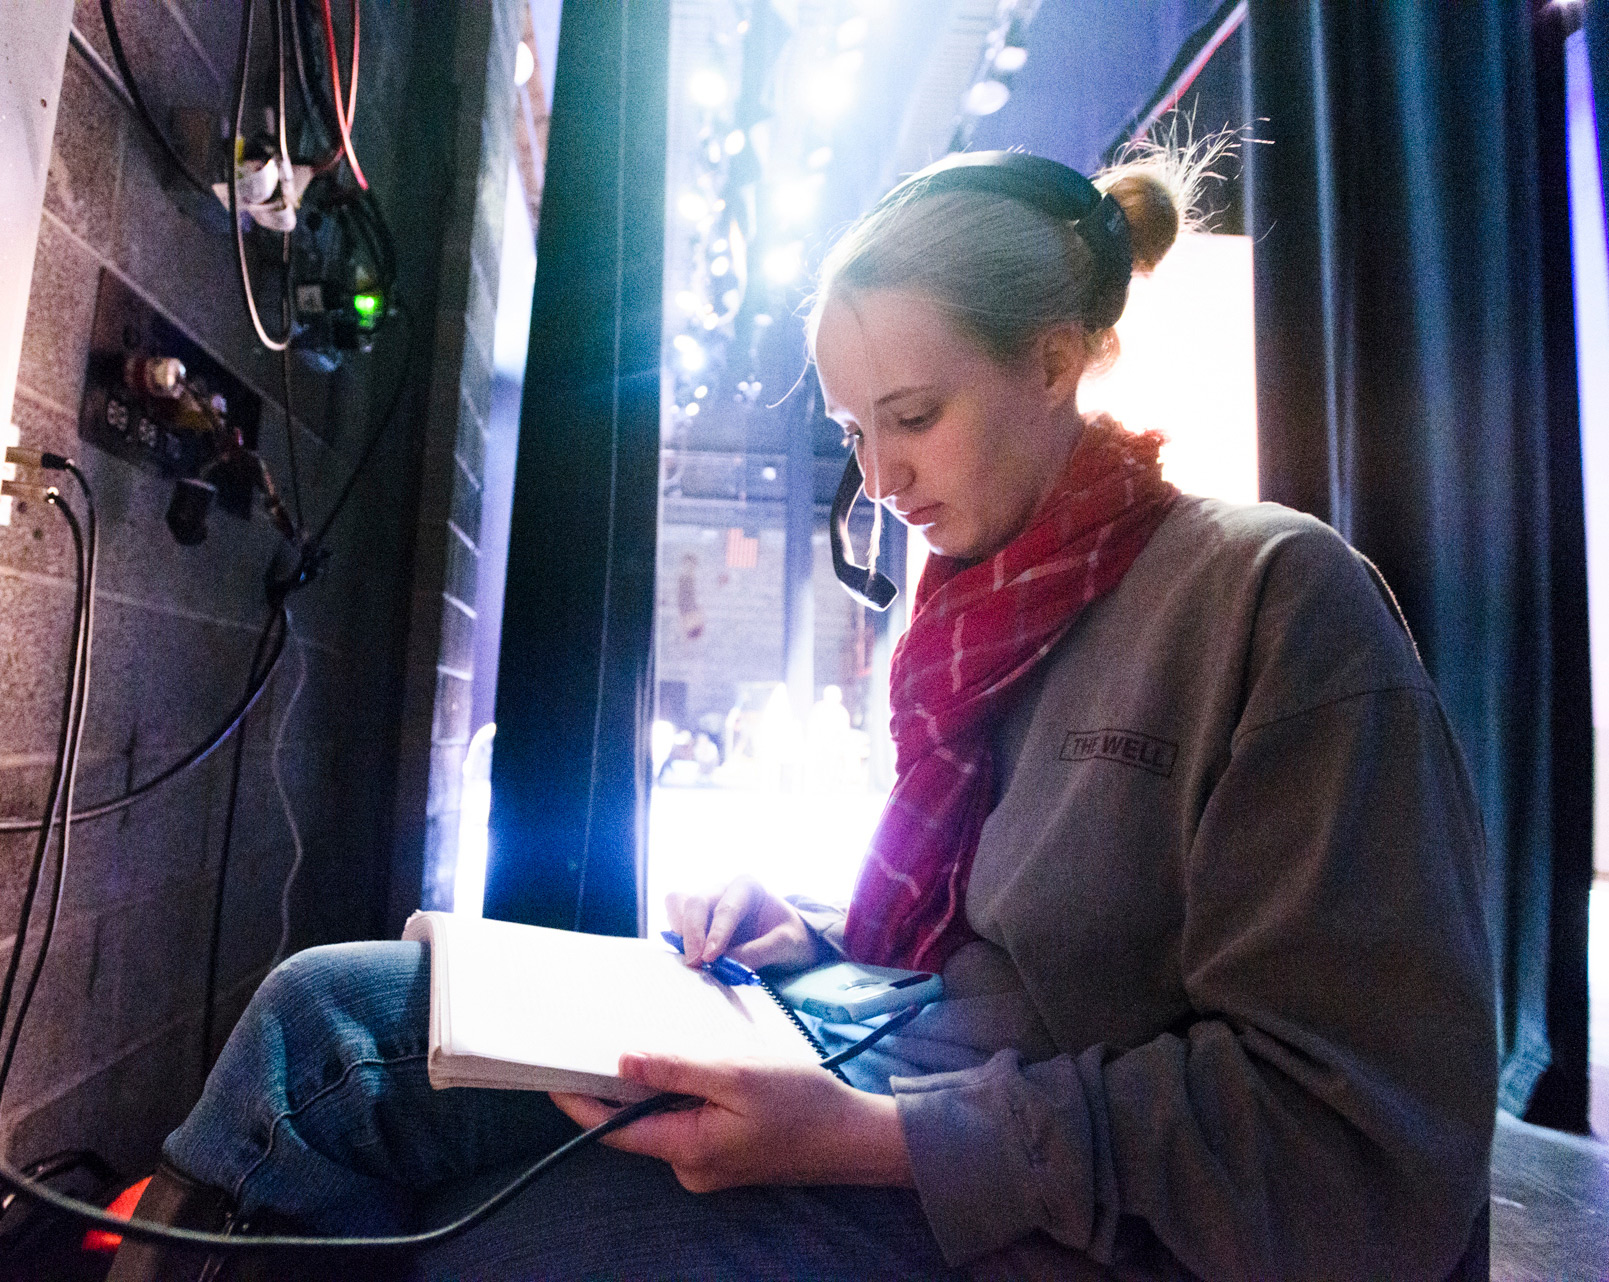 a student backstage wearing a headset and reading a script